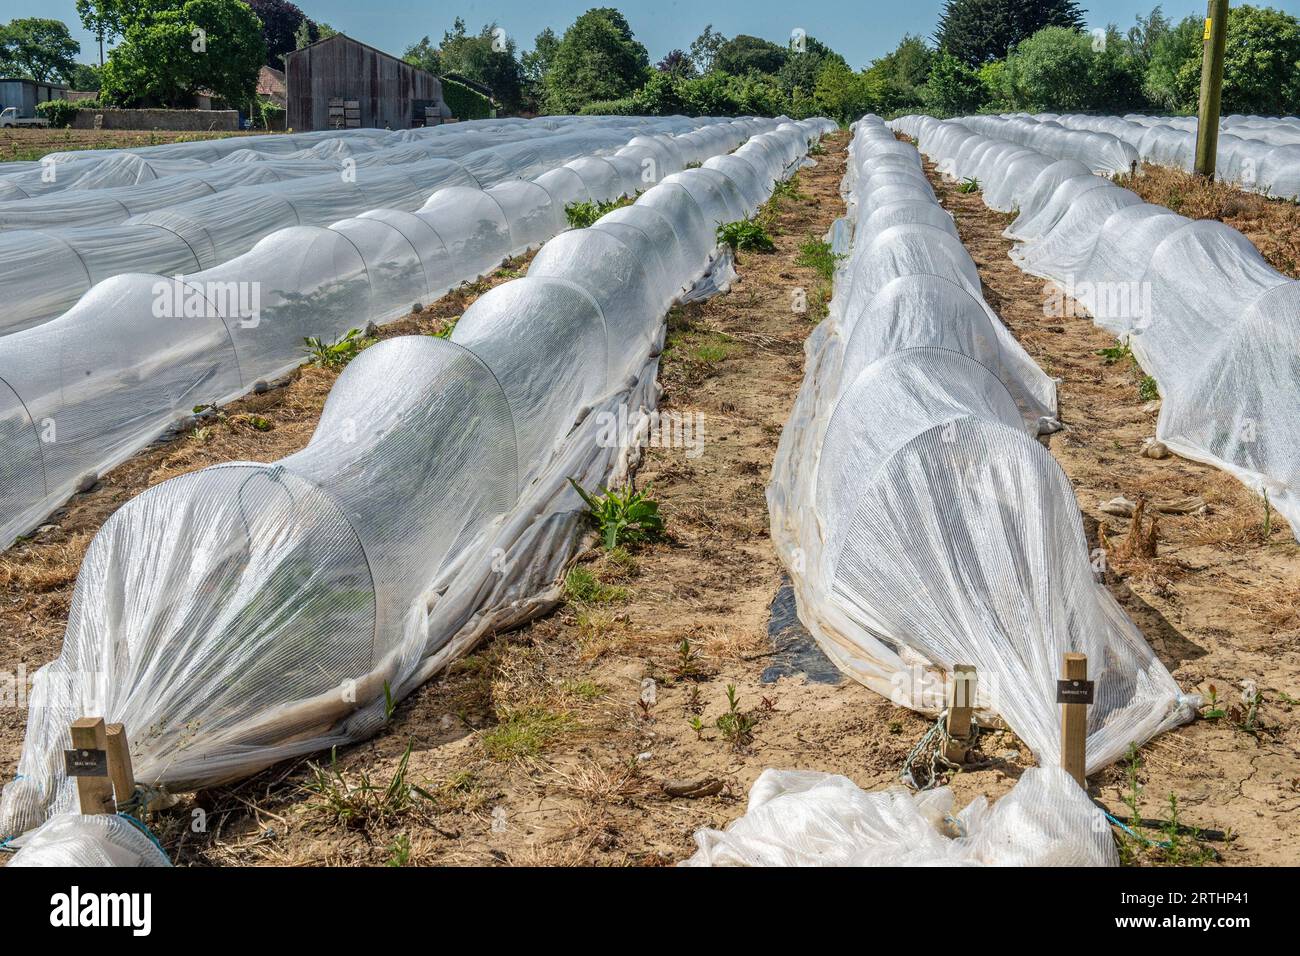 insect protection mesh over carrot plants Stock Photo